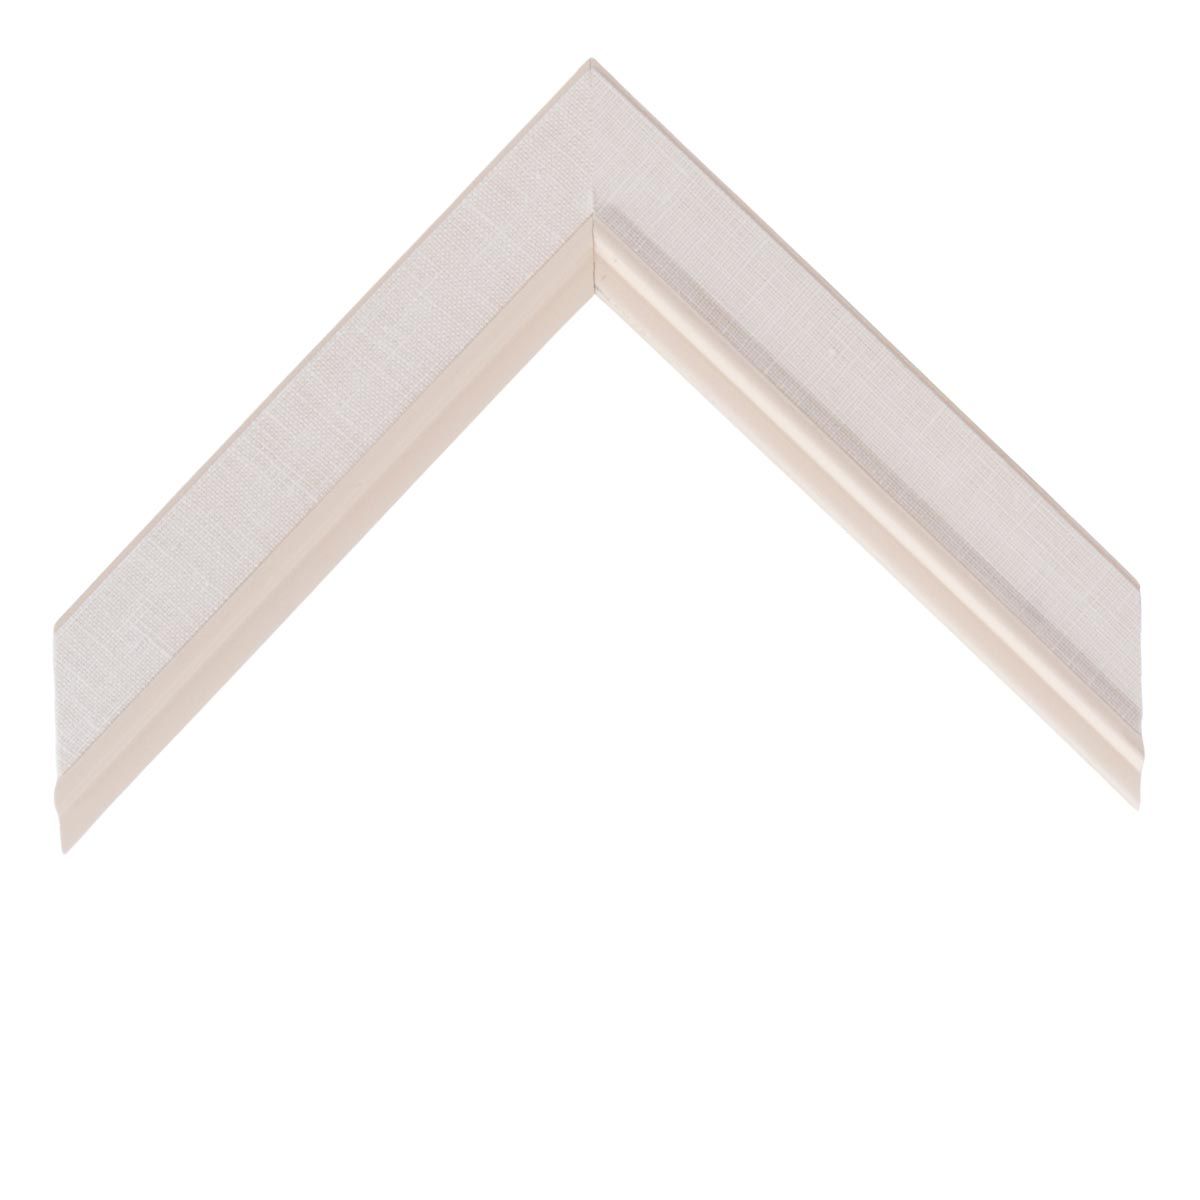 Linen Liner Moulding - Natural, White Bead ML120-1-¼, 18 x 24 inches